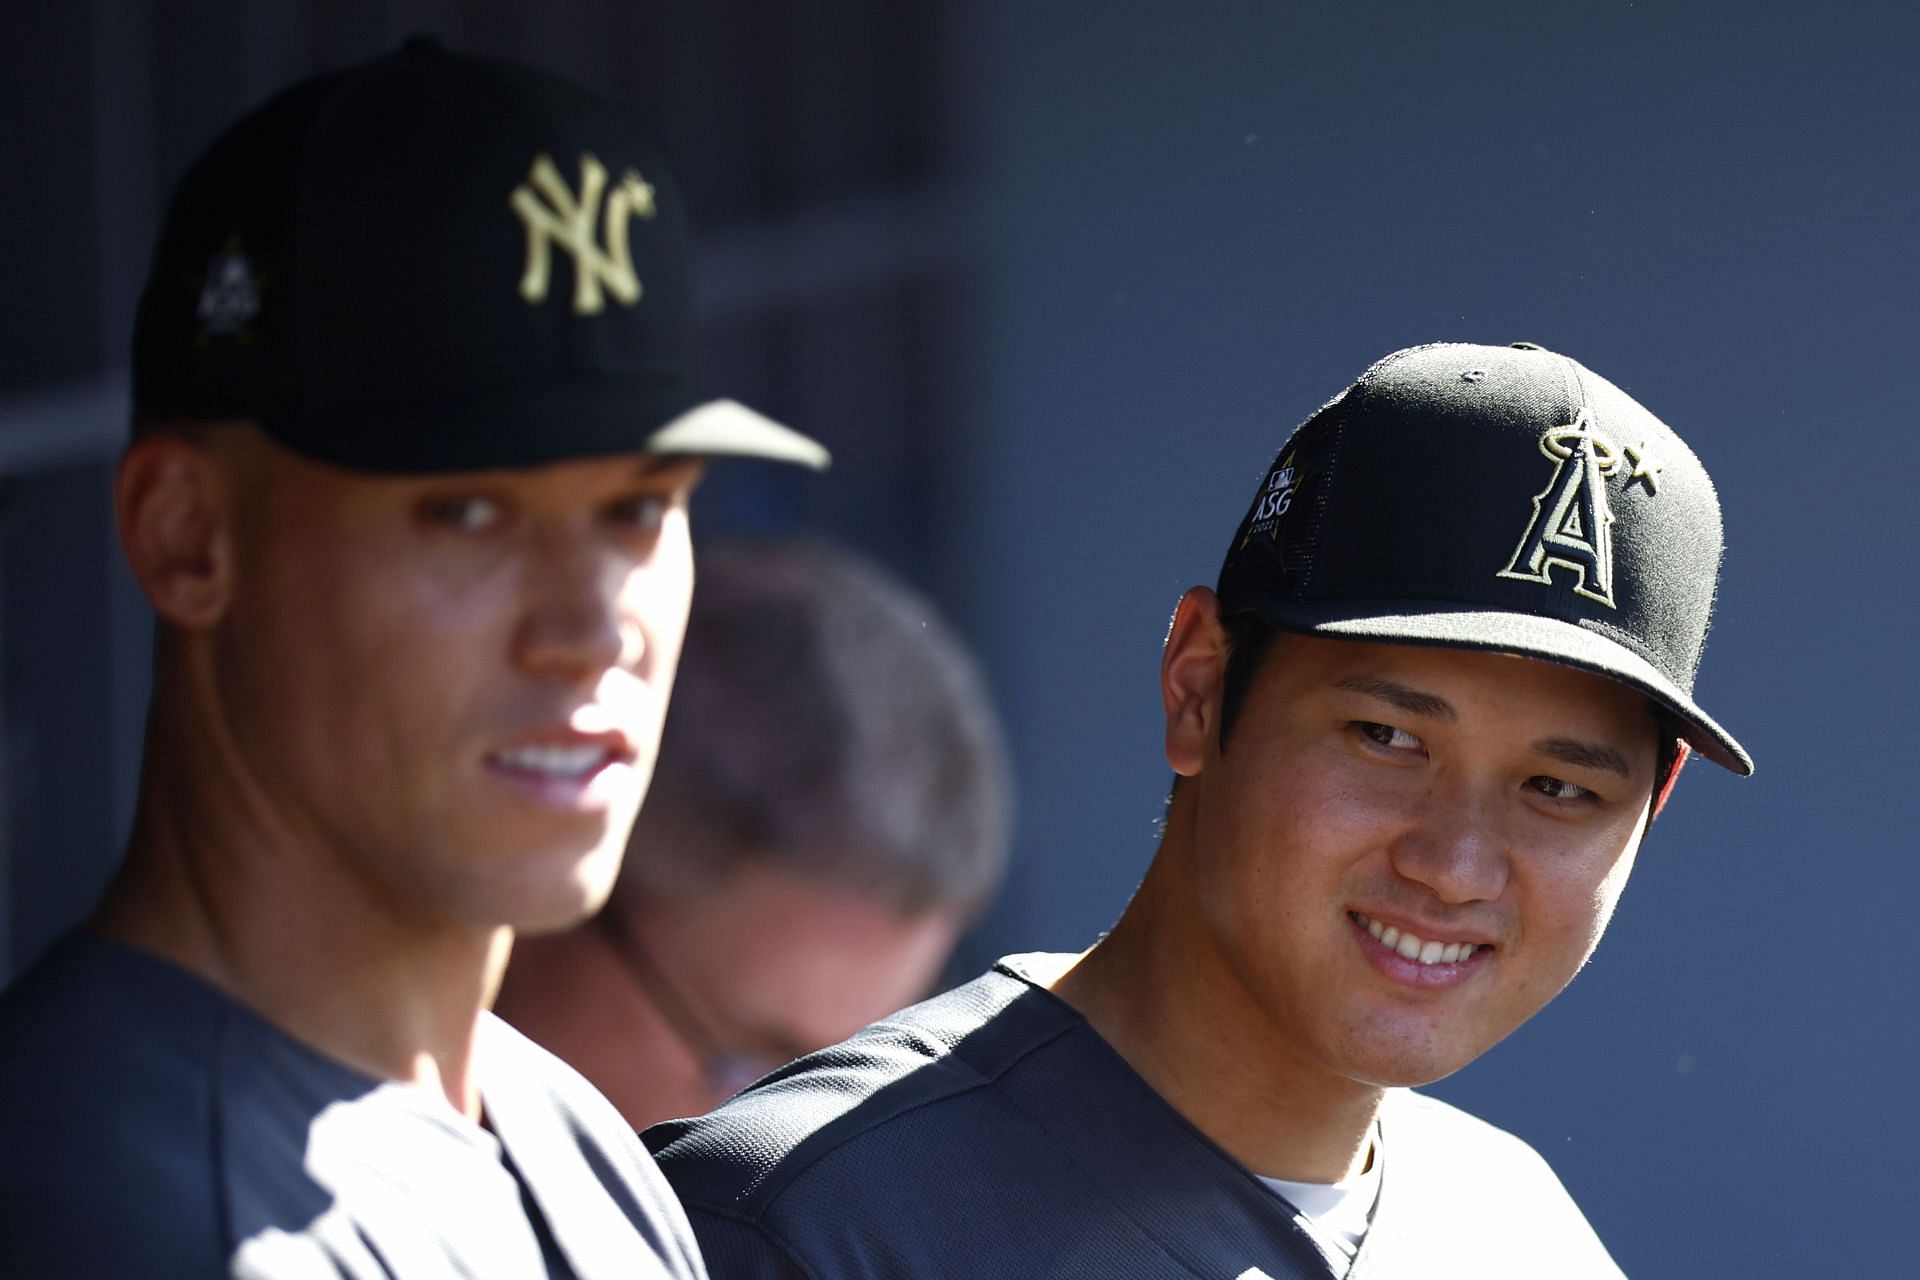 Aaron Judge #99 of the New York Yankees and Shohei Ohtani #17 of the Los Angeles Angels look on from the dugout before the 92nd MLB All-Star Game